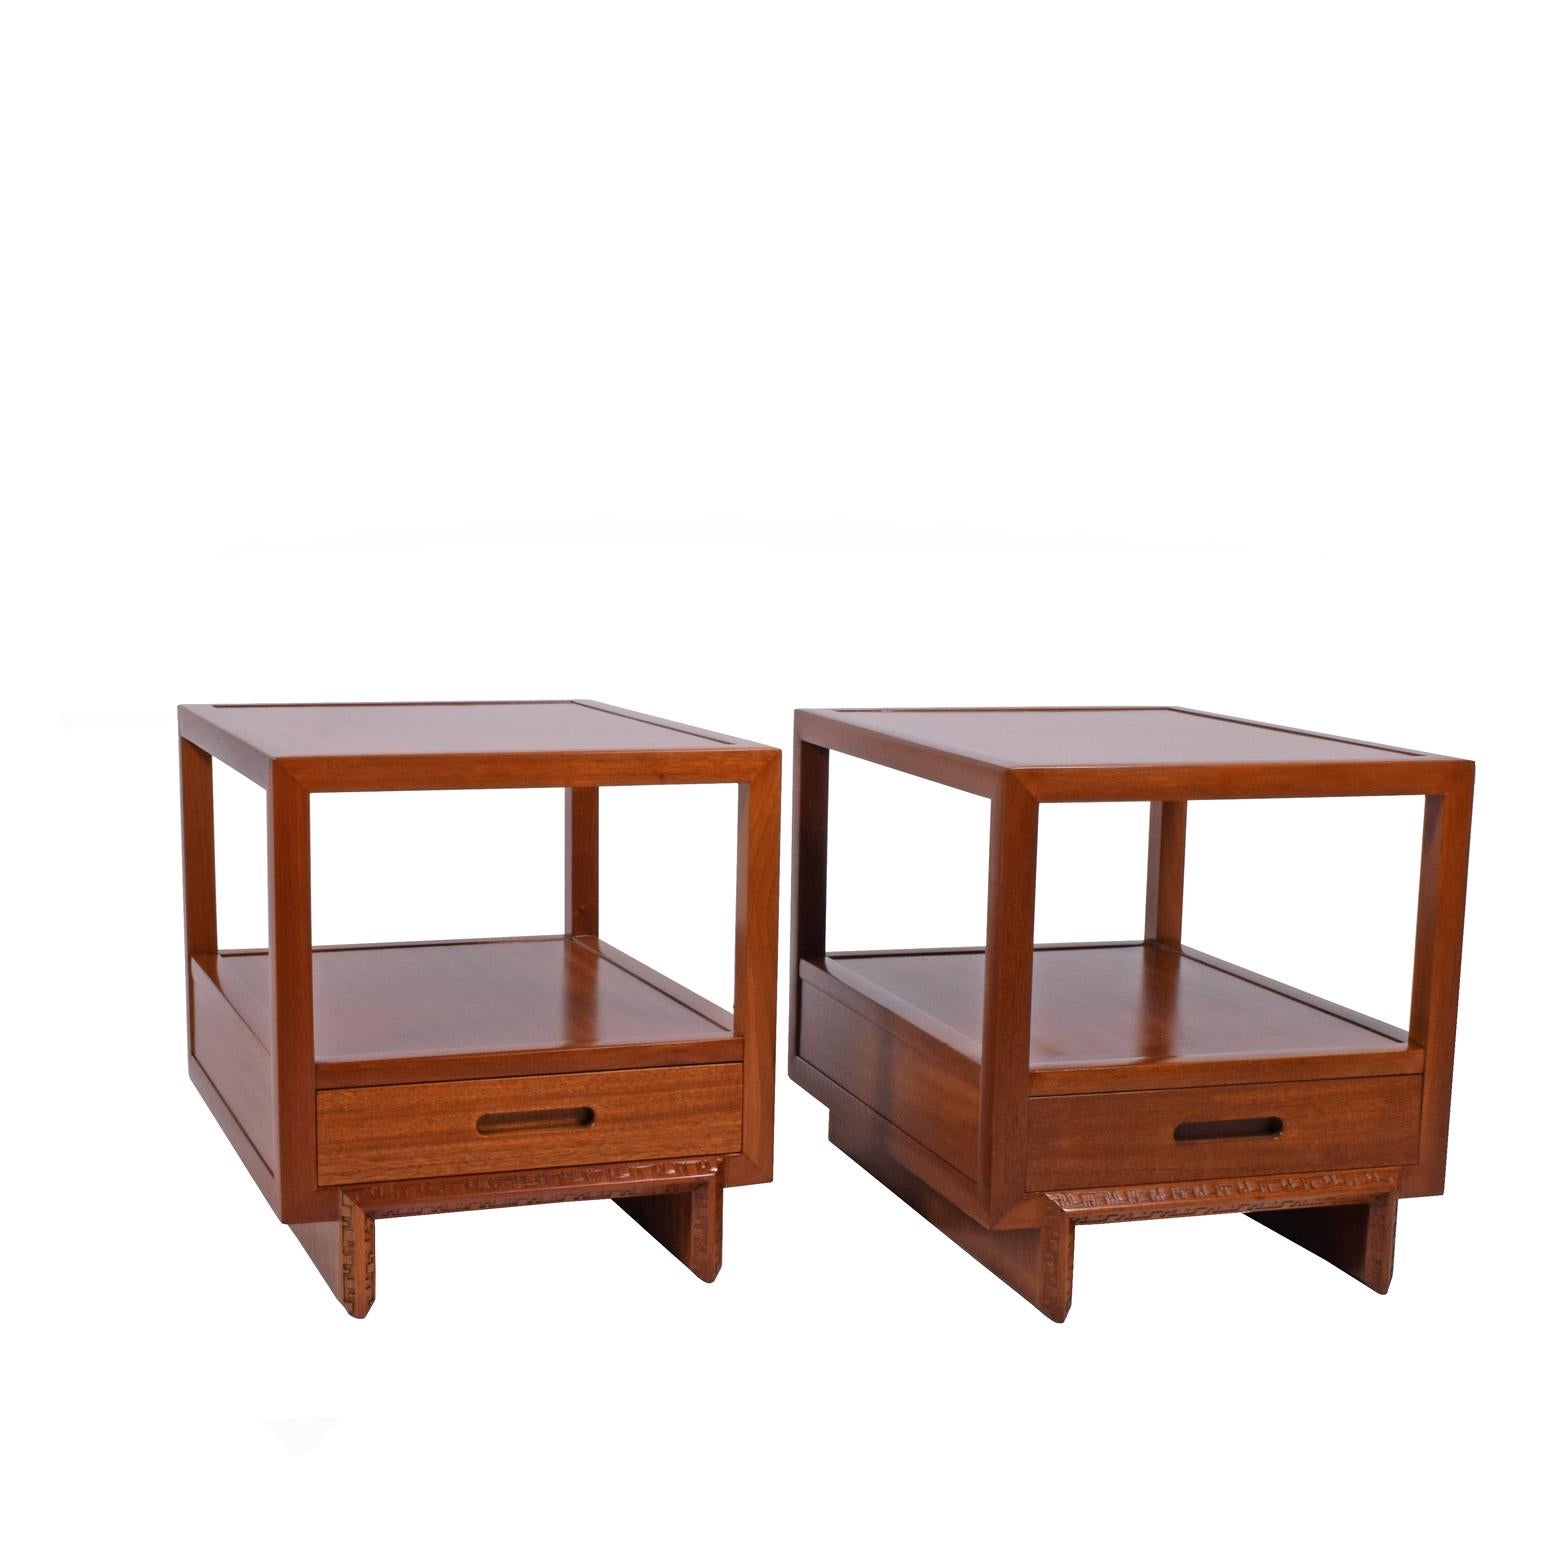 American Pair of Nightstands/Side Tables by Frank Lloyd Wright for Heritage Henredon